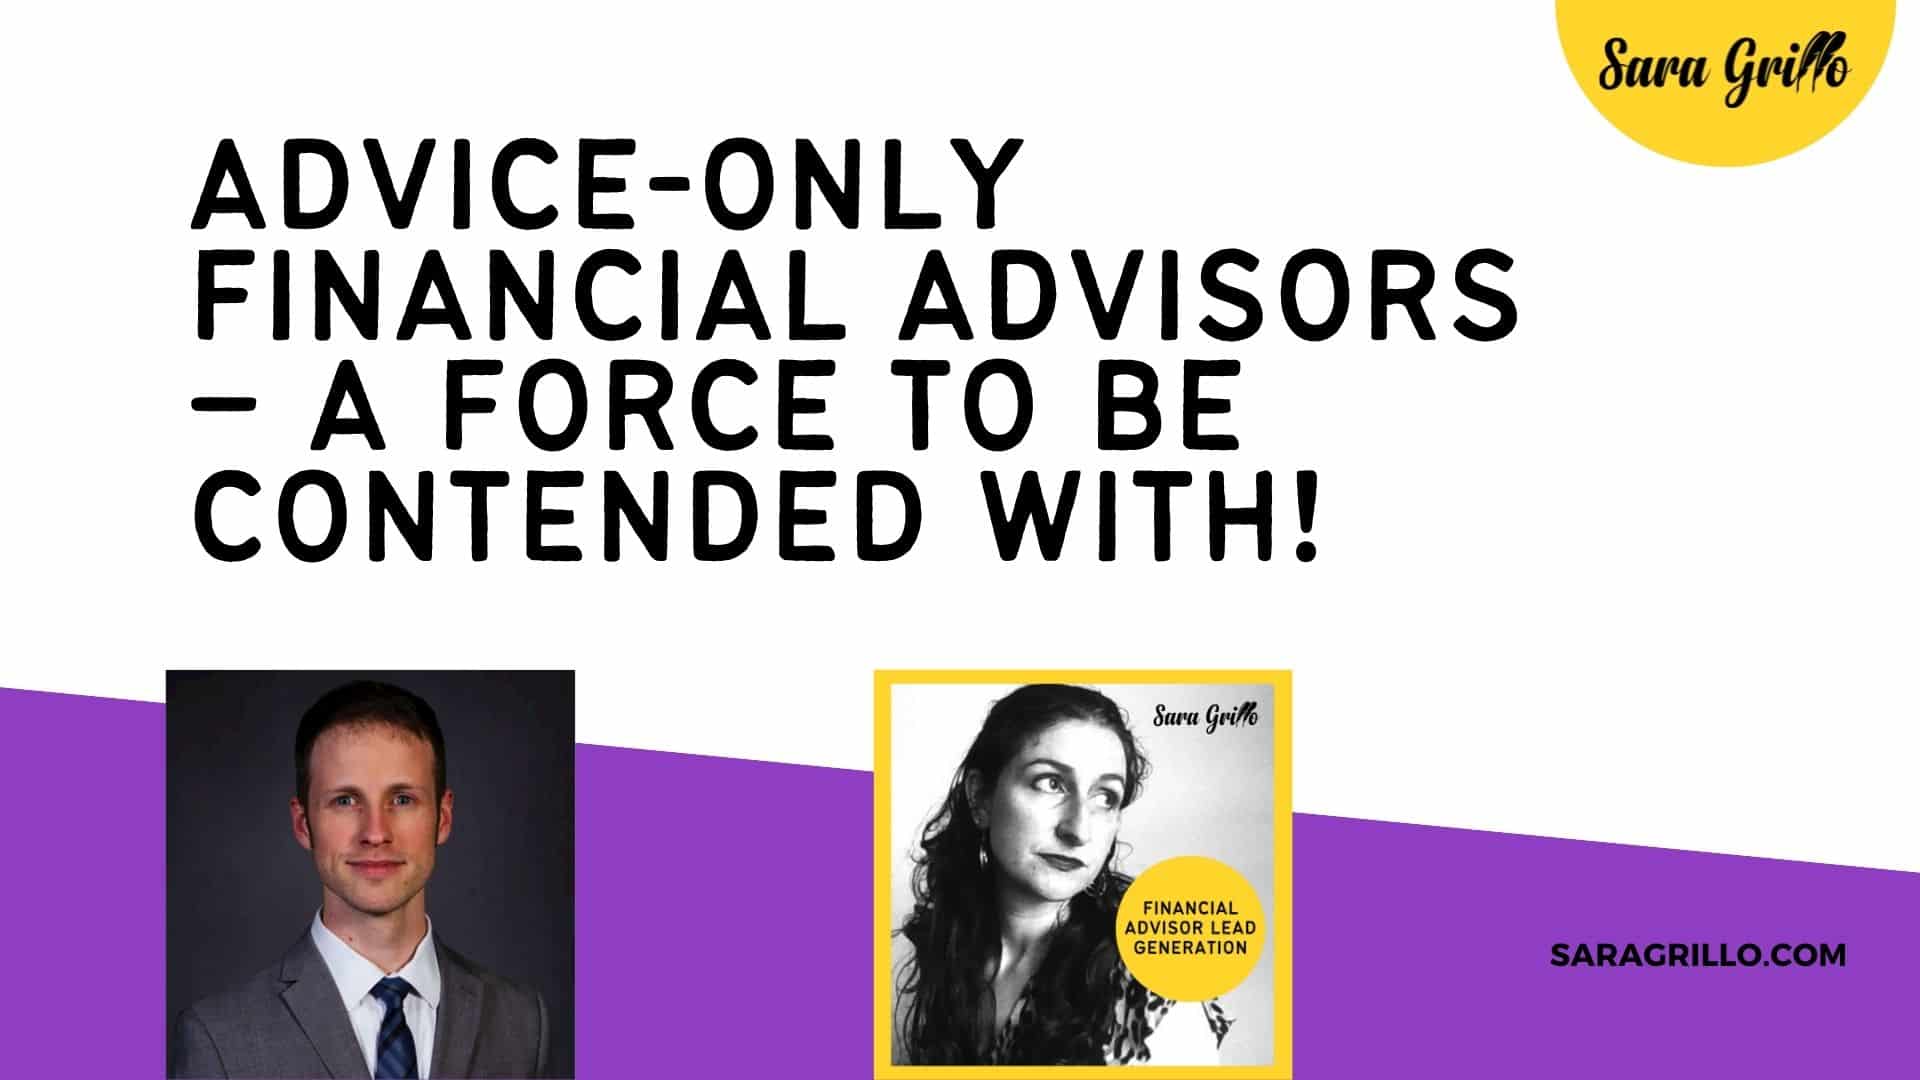 Advice-only financial planners are a force to be contended with!